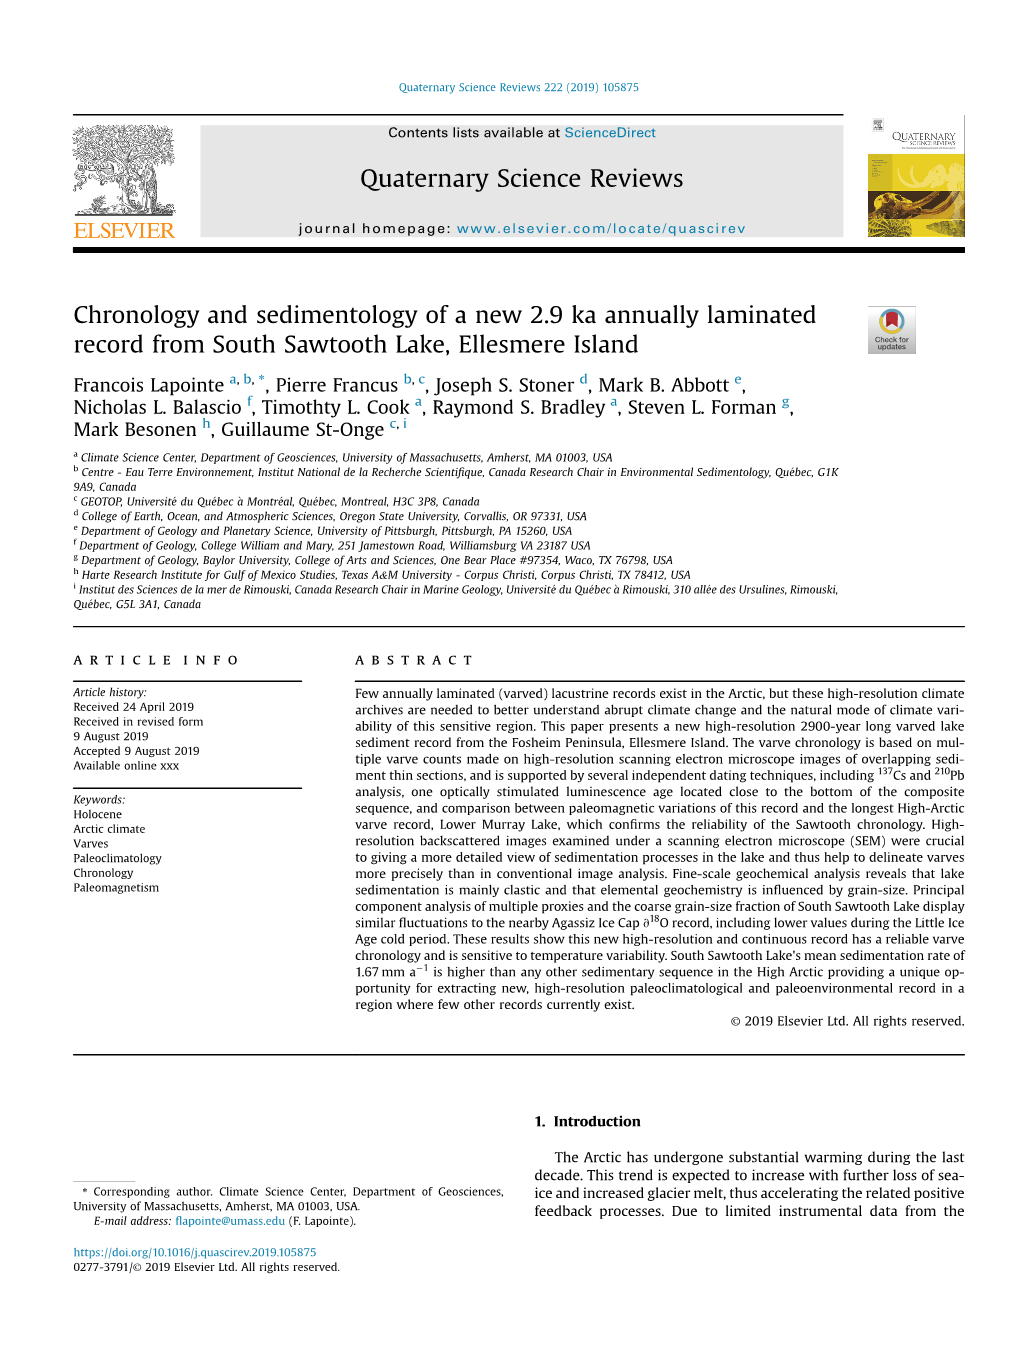 Chronology and Sedimentology of a New 2.9 Ka Annually Laminated Record from South Sawtooth Lake, Ellesmere Island